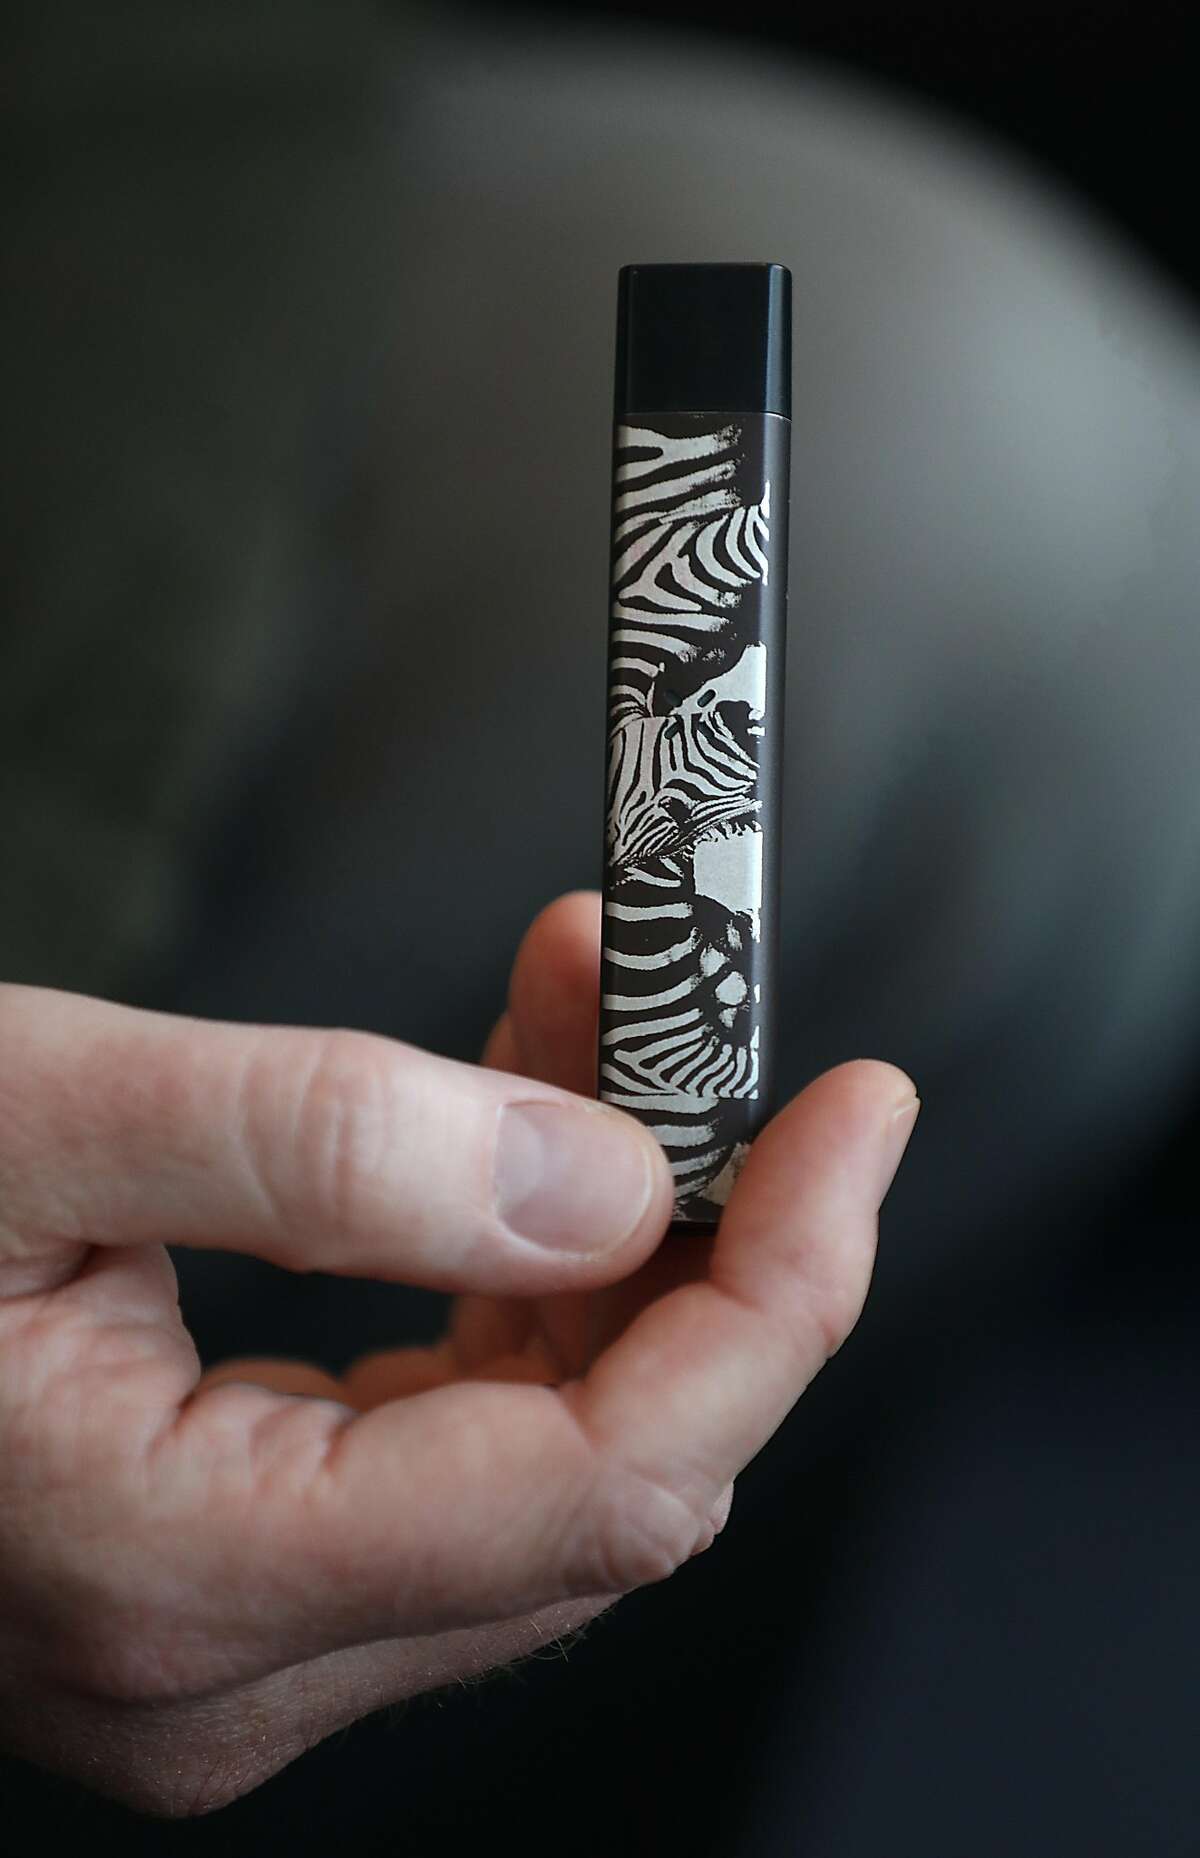 Pax VP partner Nick Dor shows his Pax Era vaporizer used for cartridges with marijuana concentrates on Tuesday, Feb. 19, 2019, in San Francisco, Calif.